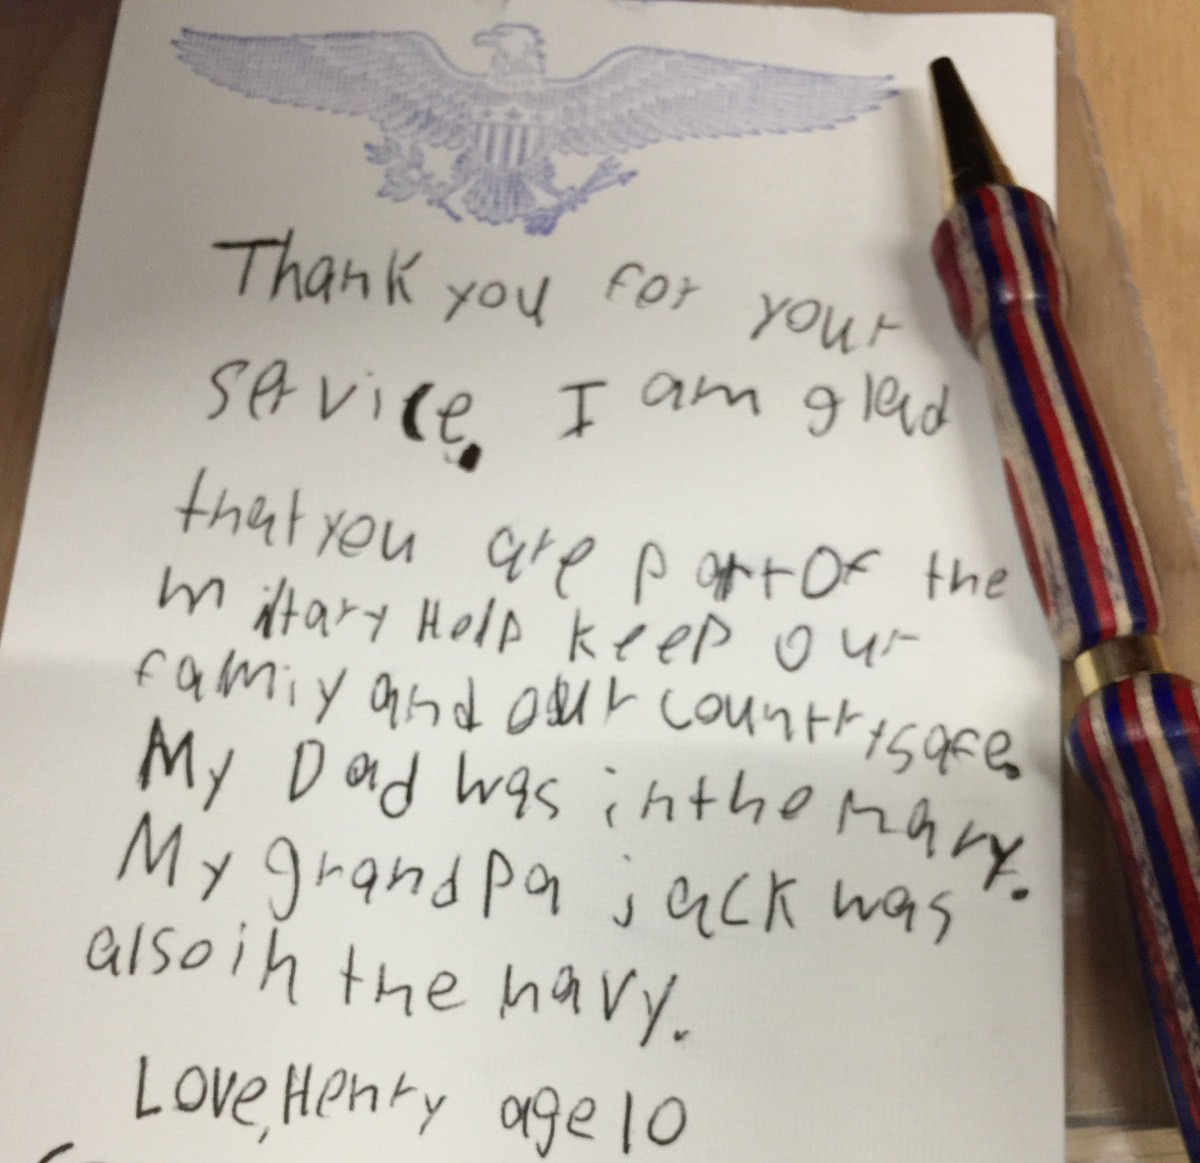 Henry, age 10, expressed his thanks in a handwritten note.